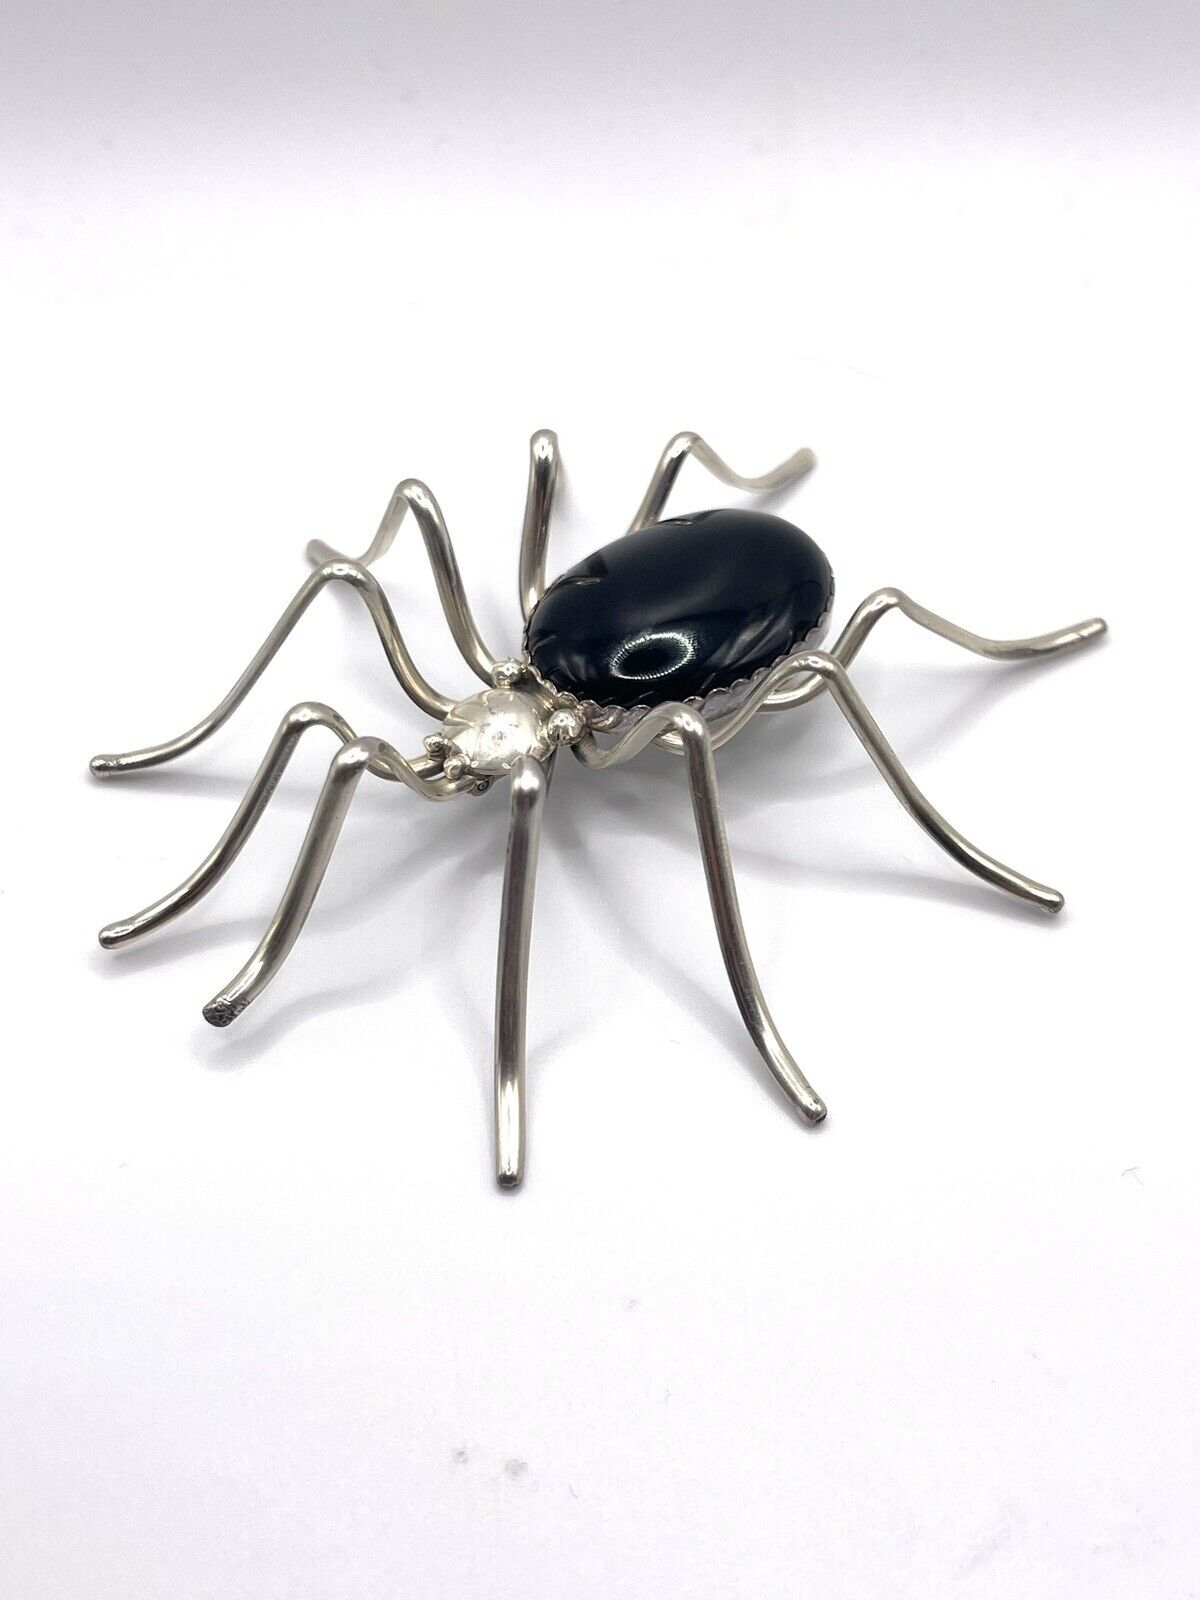 XL 4” NAVAJO SPIDER Broach Pin E. SPENCER (Esther) STERLING SILVER & Onyx 925